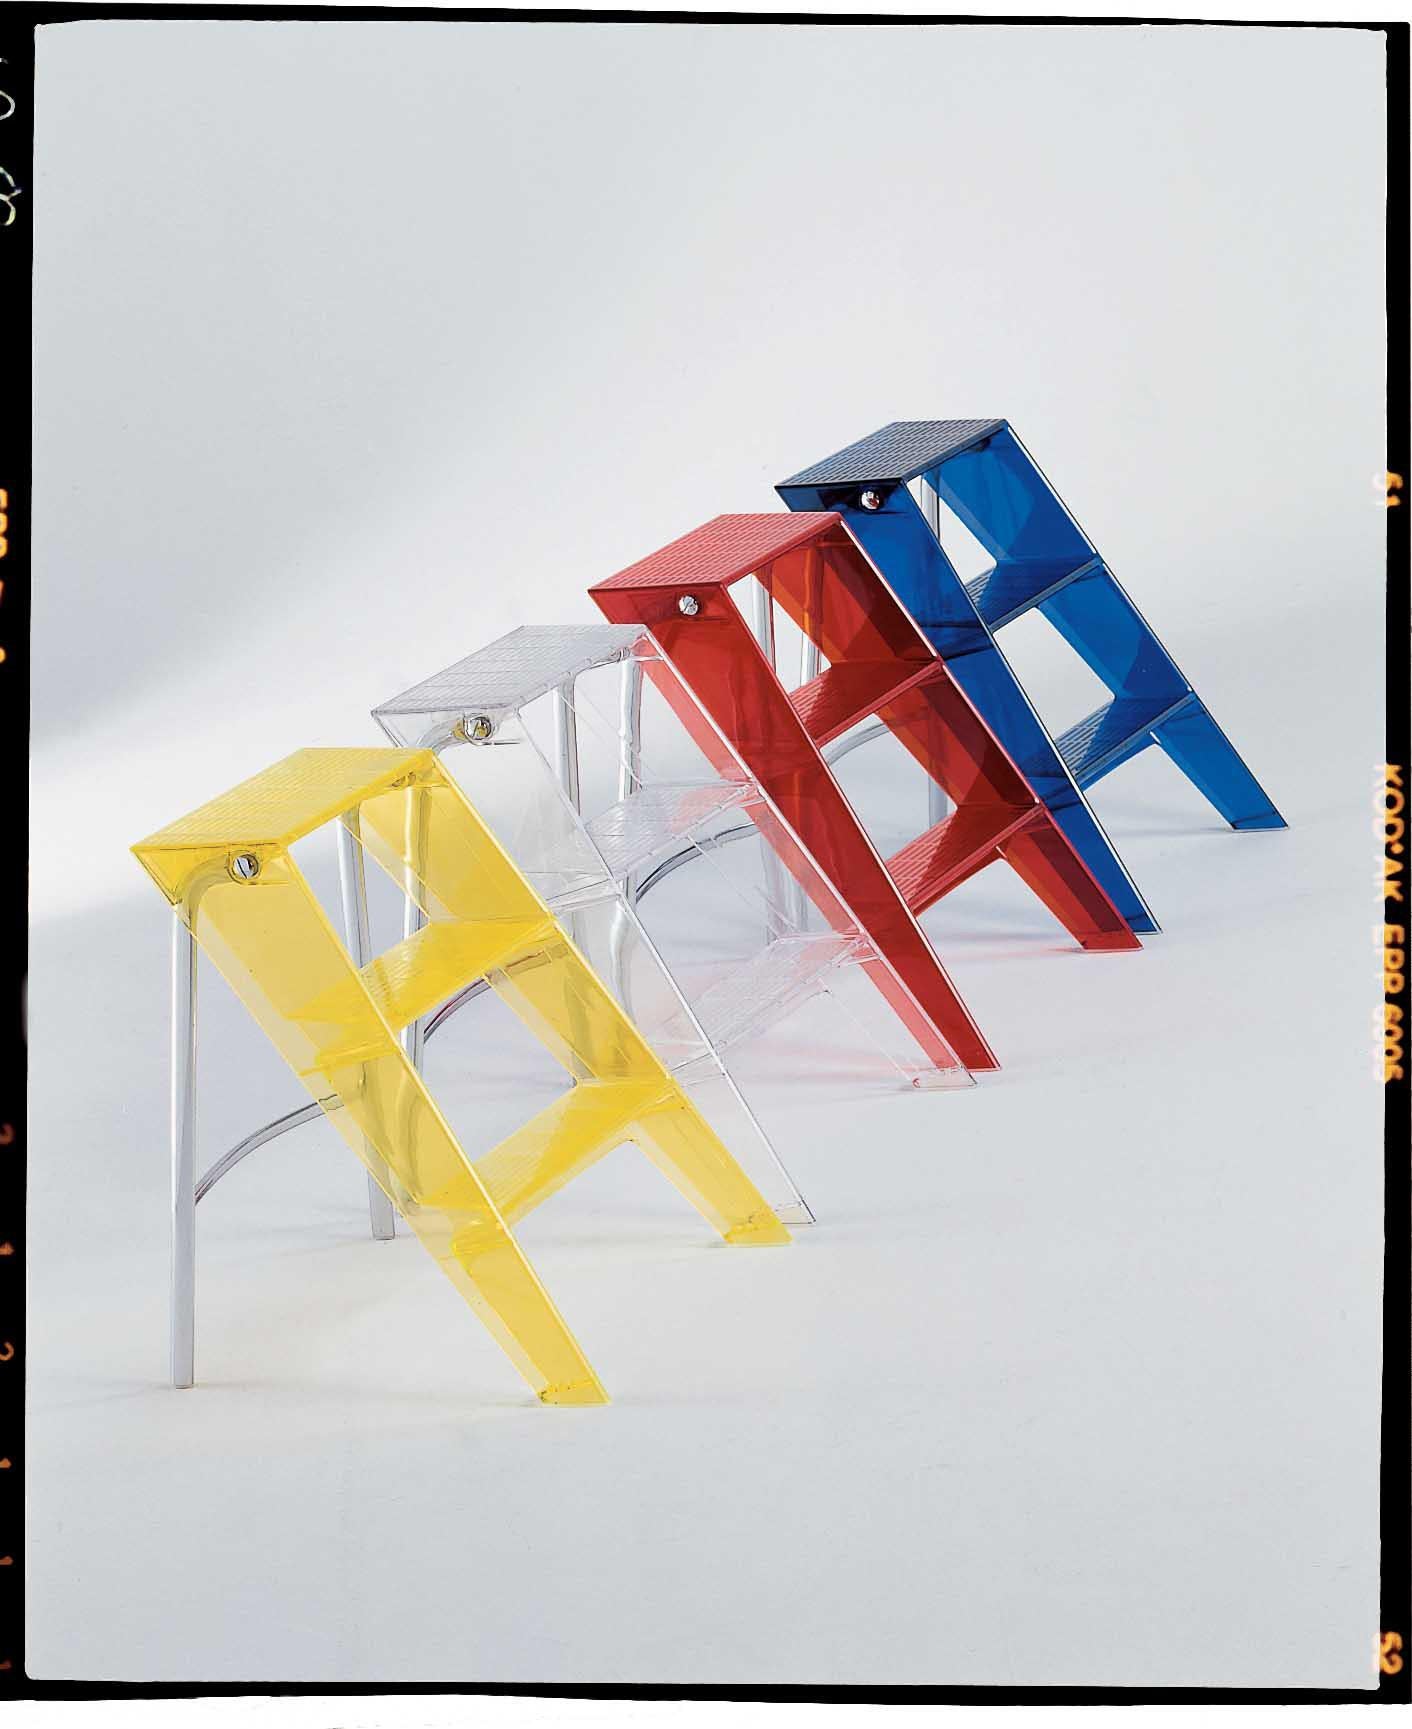 Italian Kartell Upper Step Ladder in Cobalt by Alberto Meda, Paolo Rizzatto For Sale